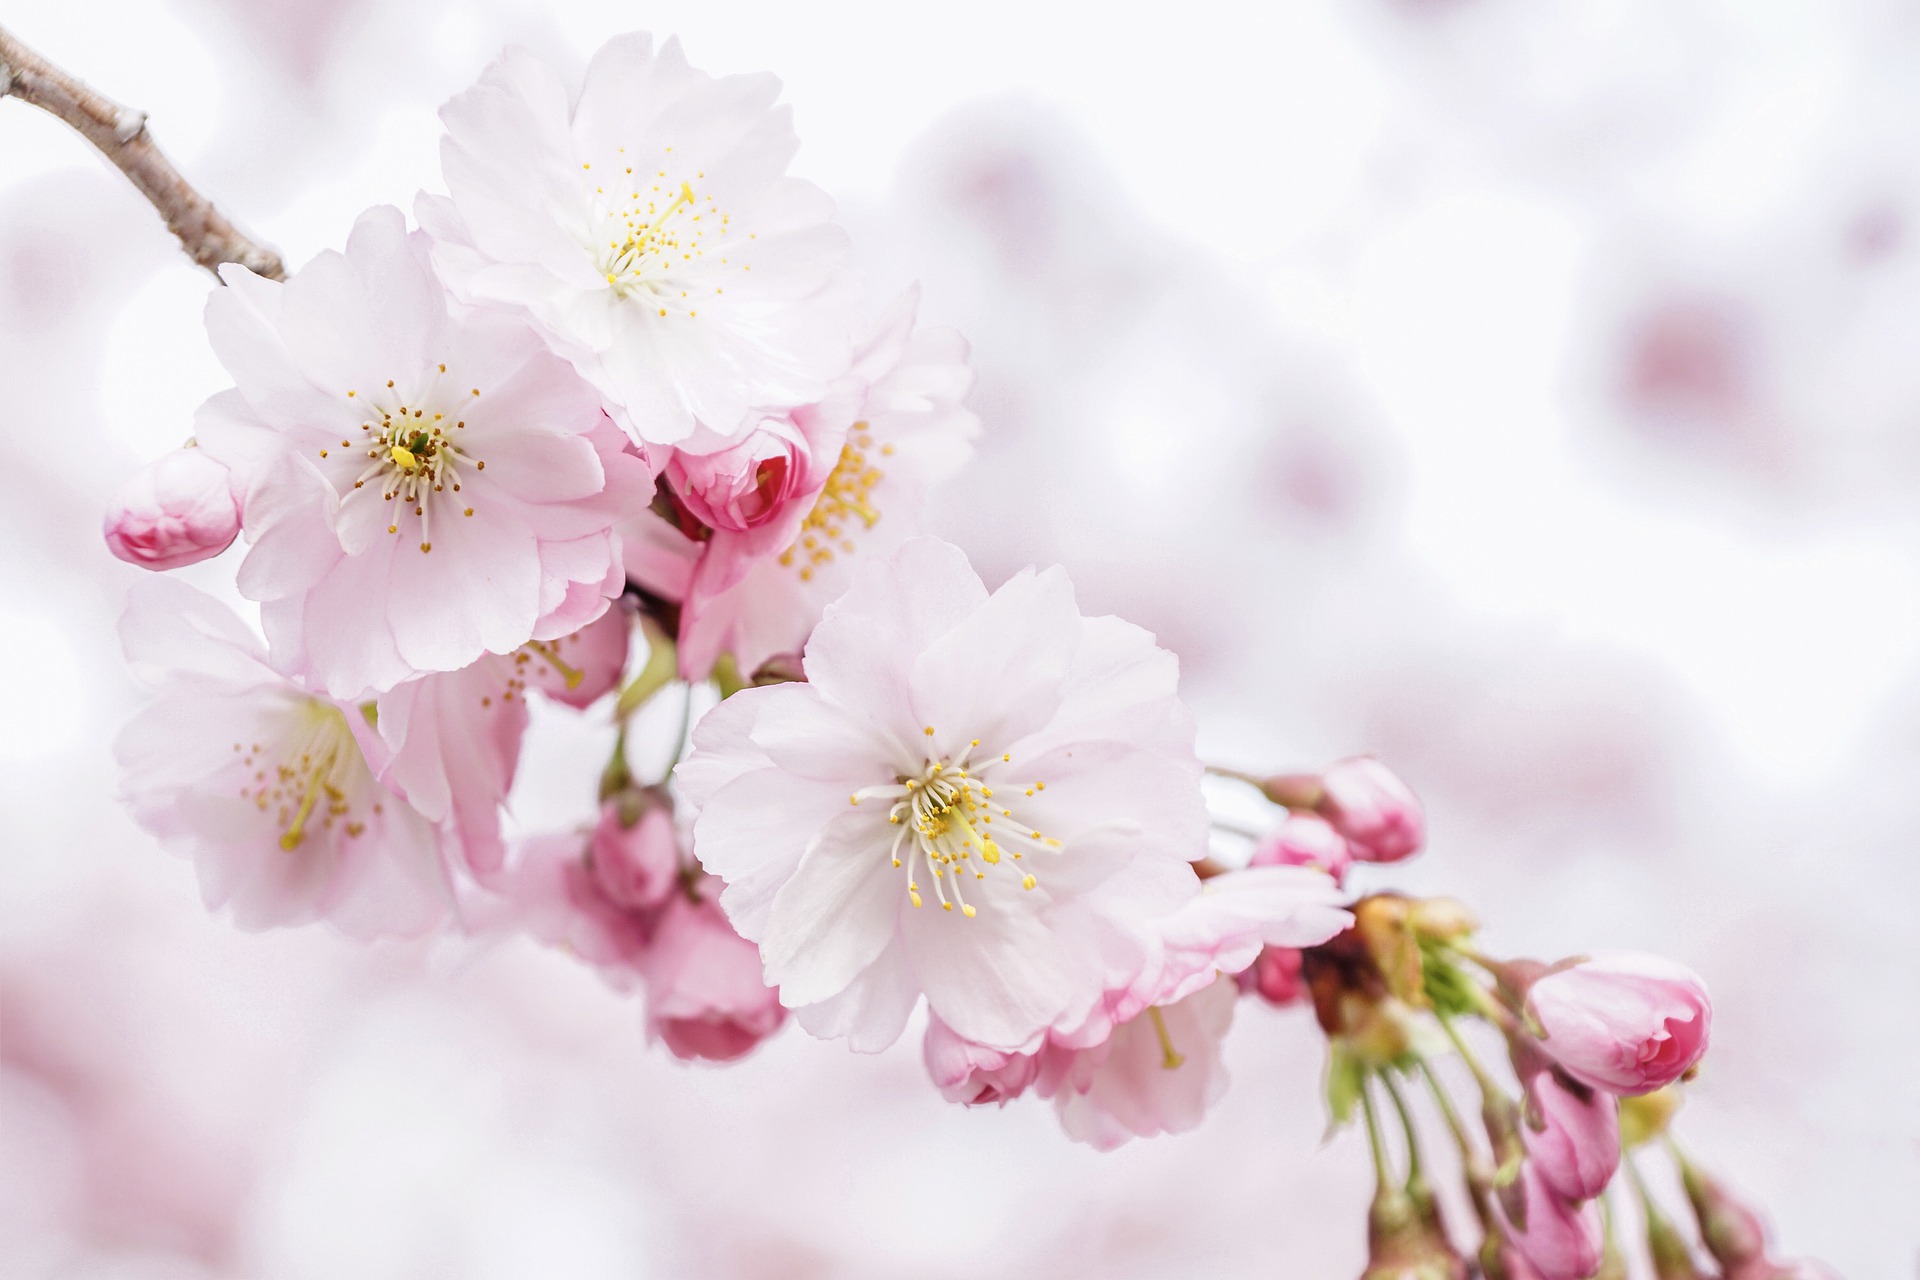 A branch with white and pink cherry blossoms